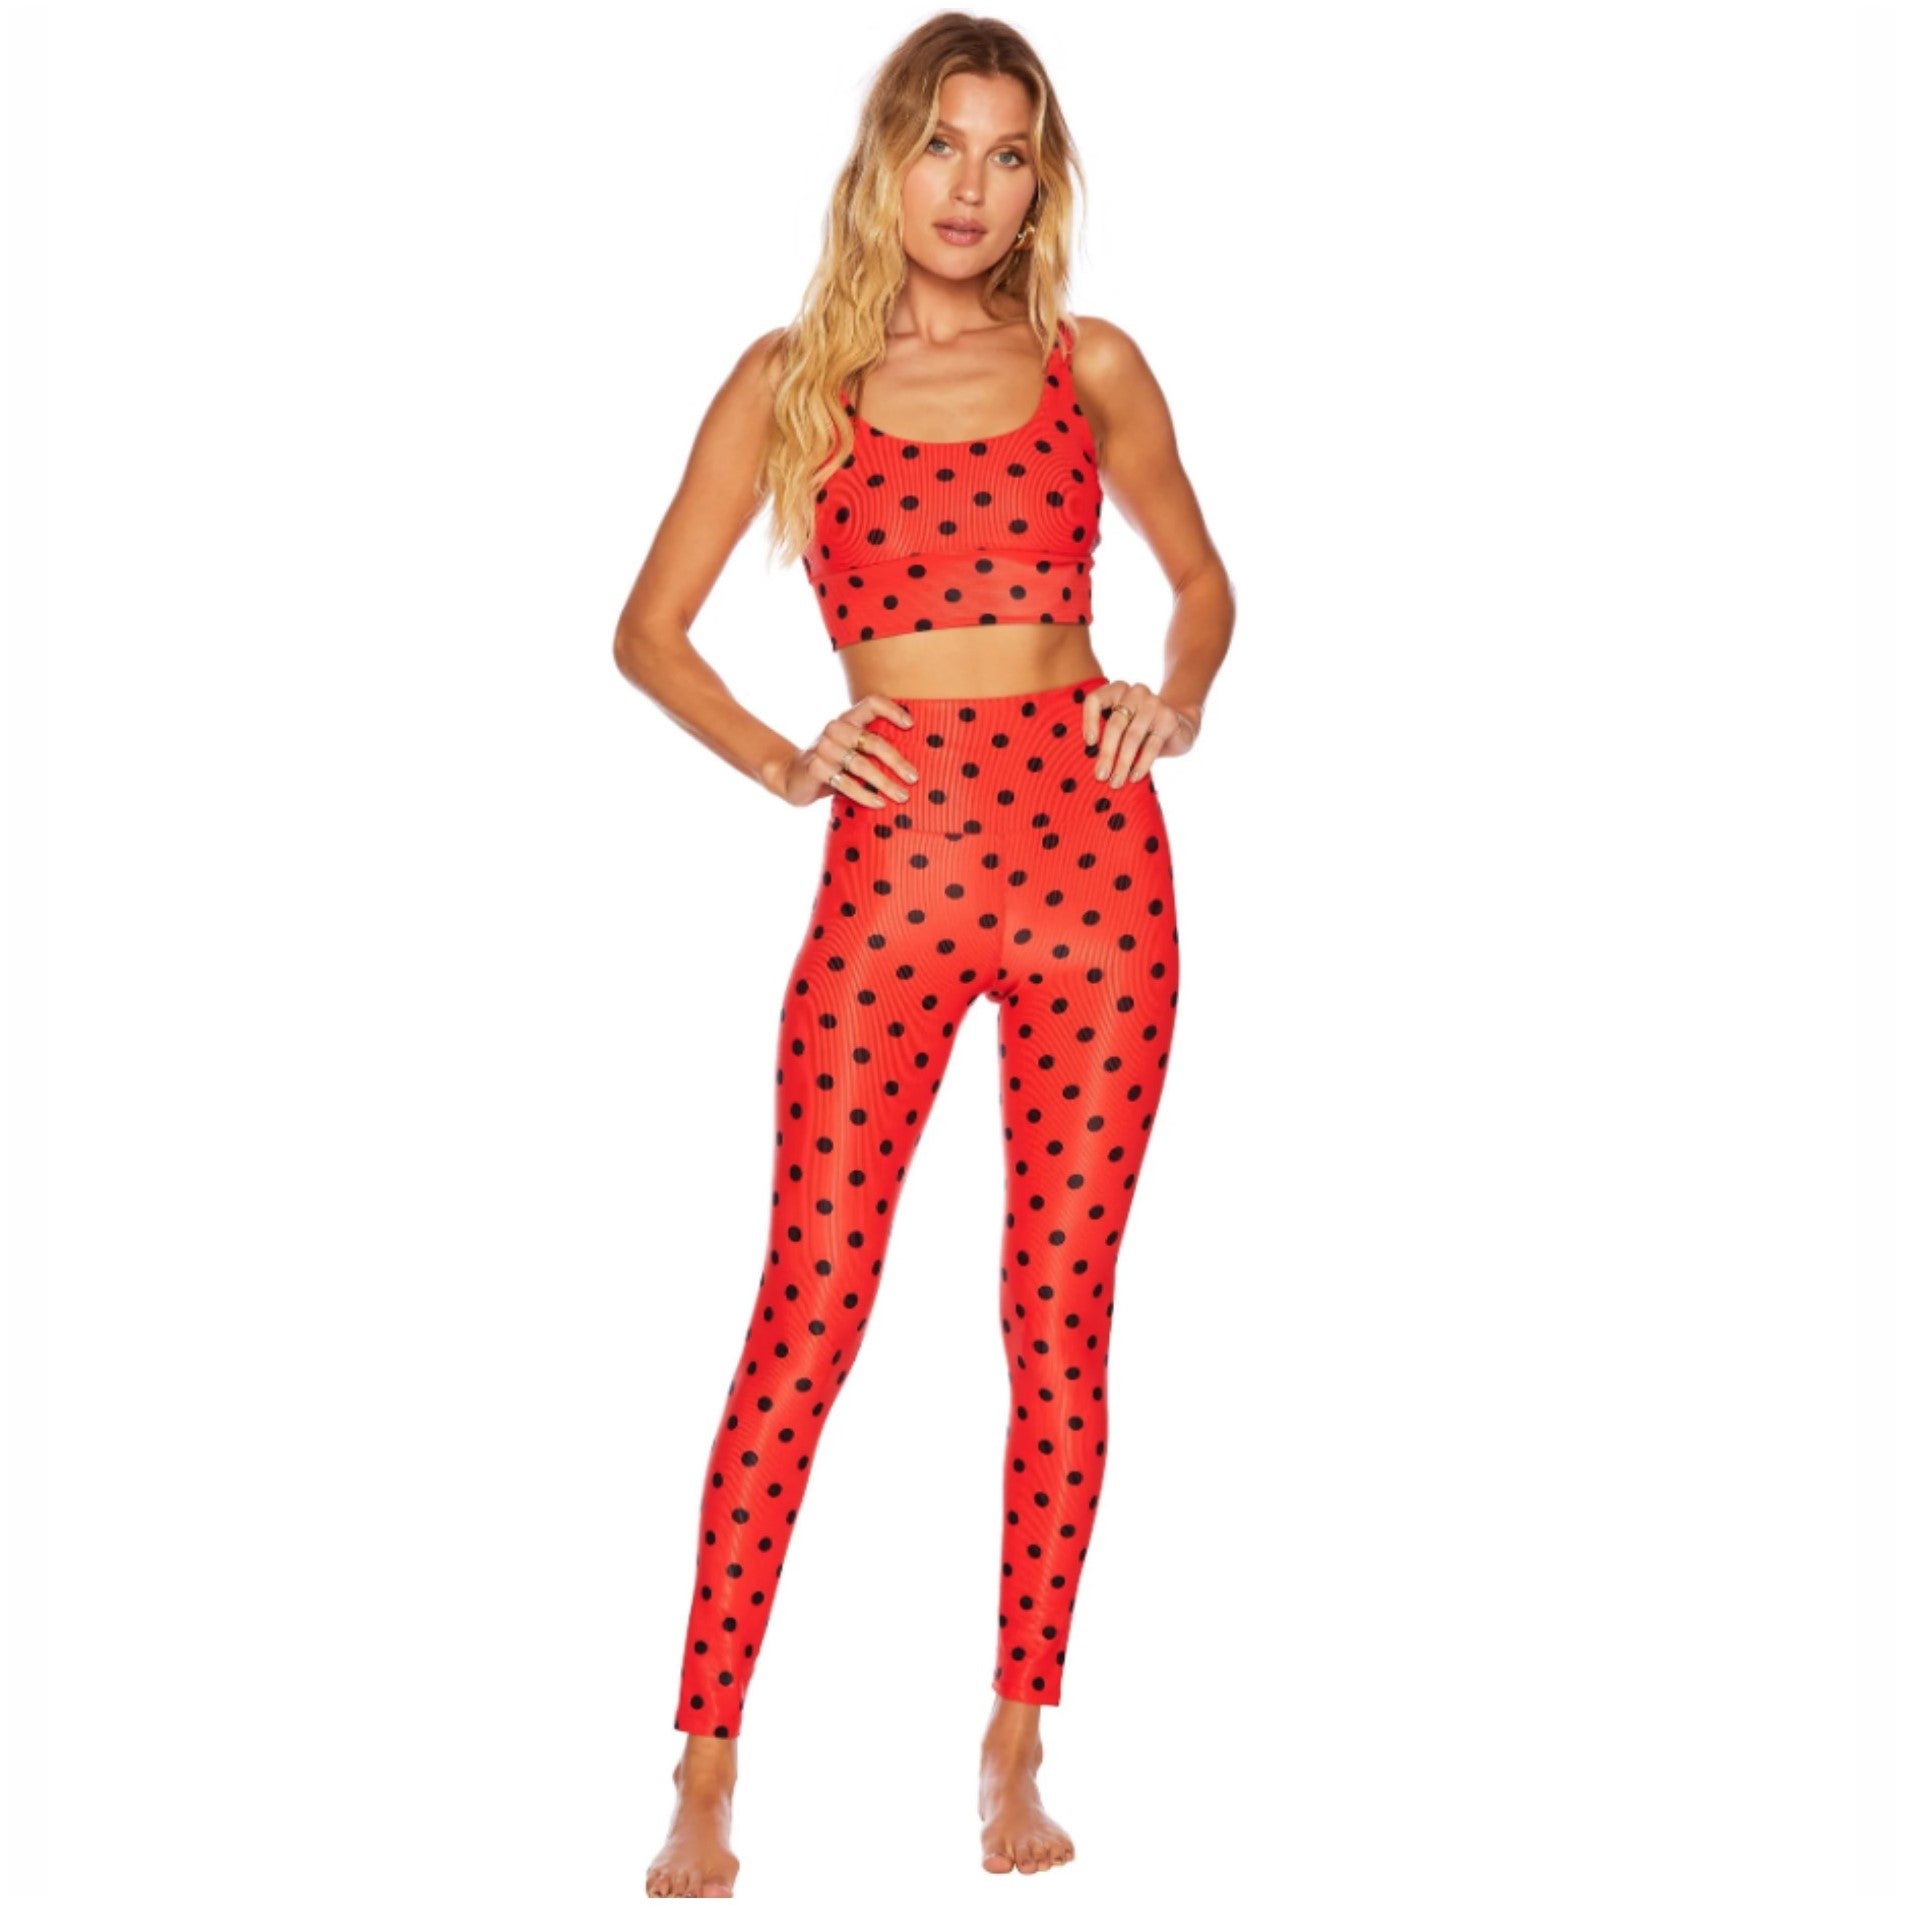 Ribbed Ayla Legging Cherry - Beach Riot - simplyWORKOUT